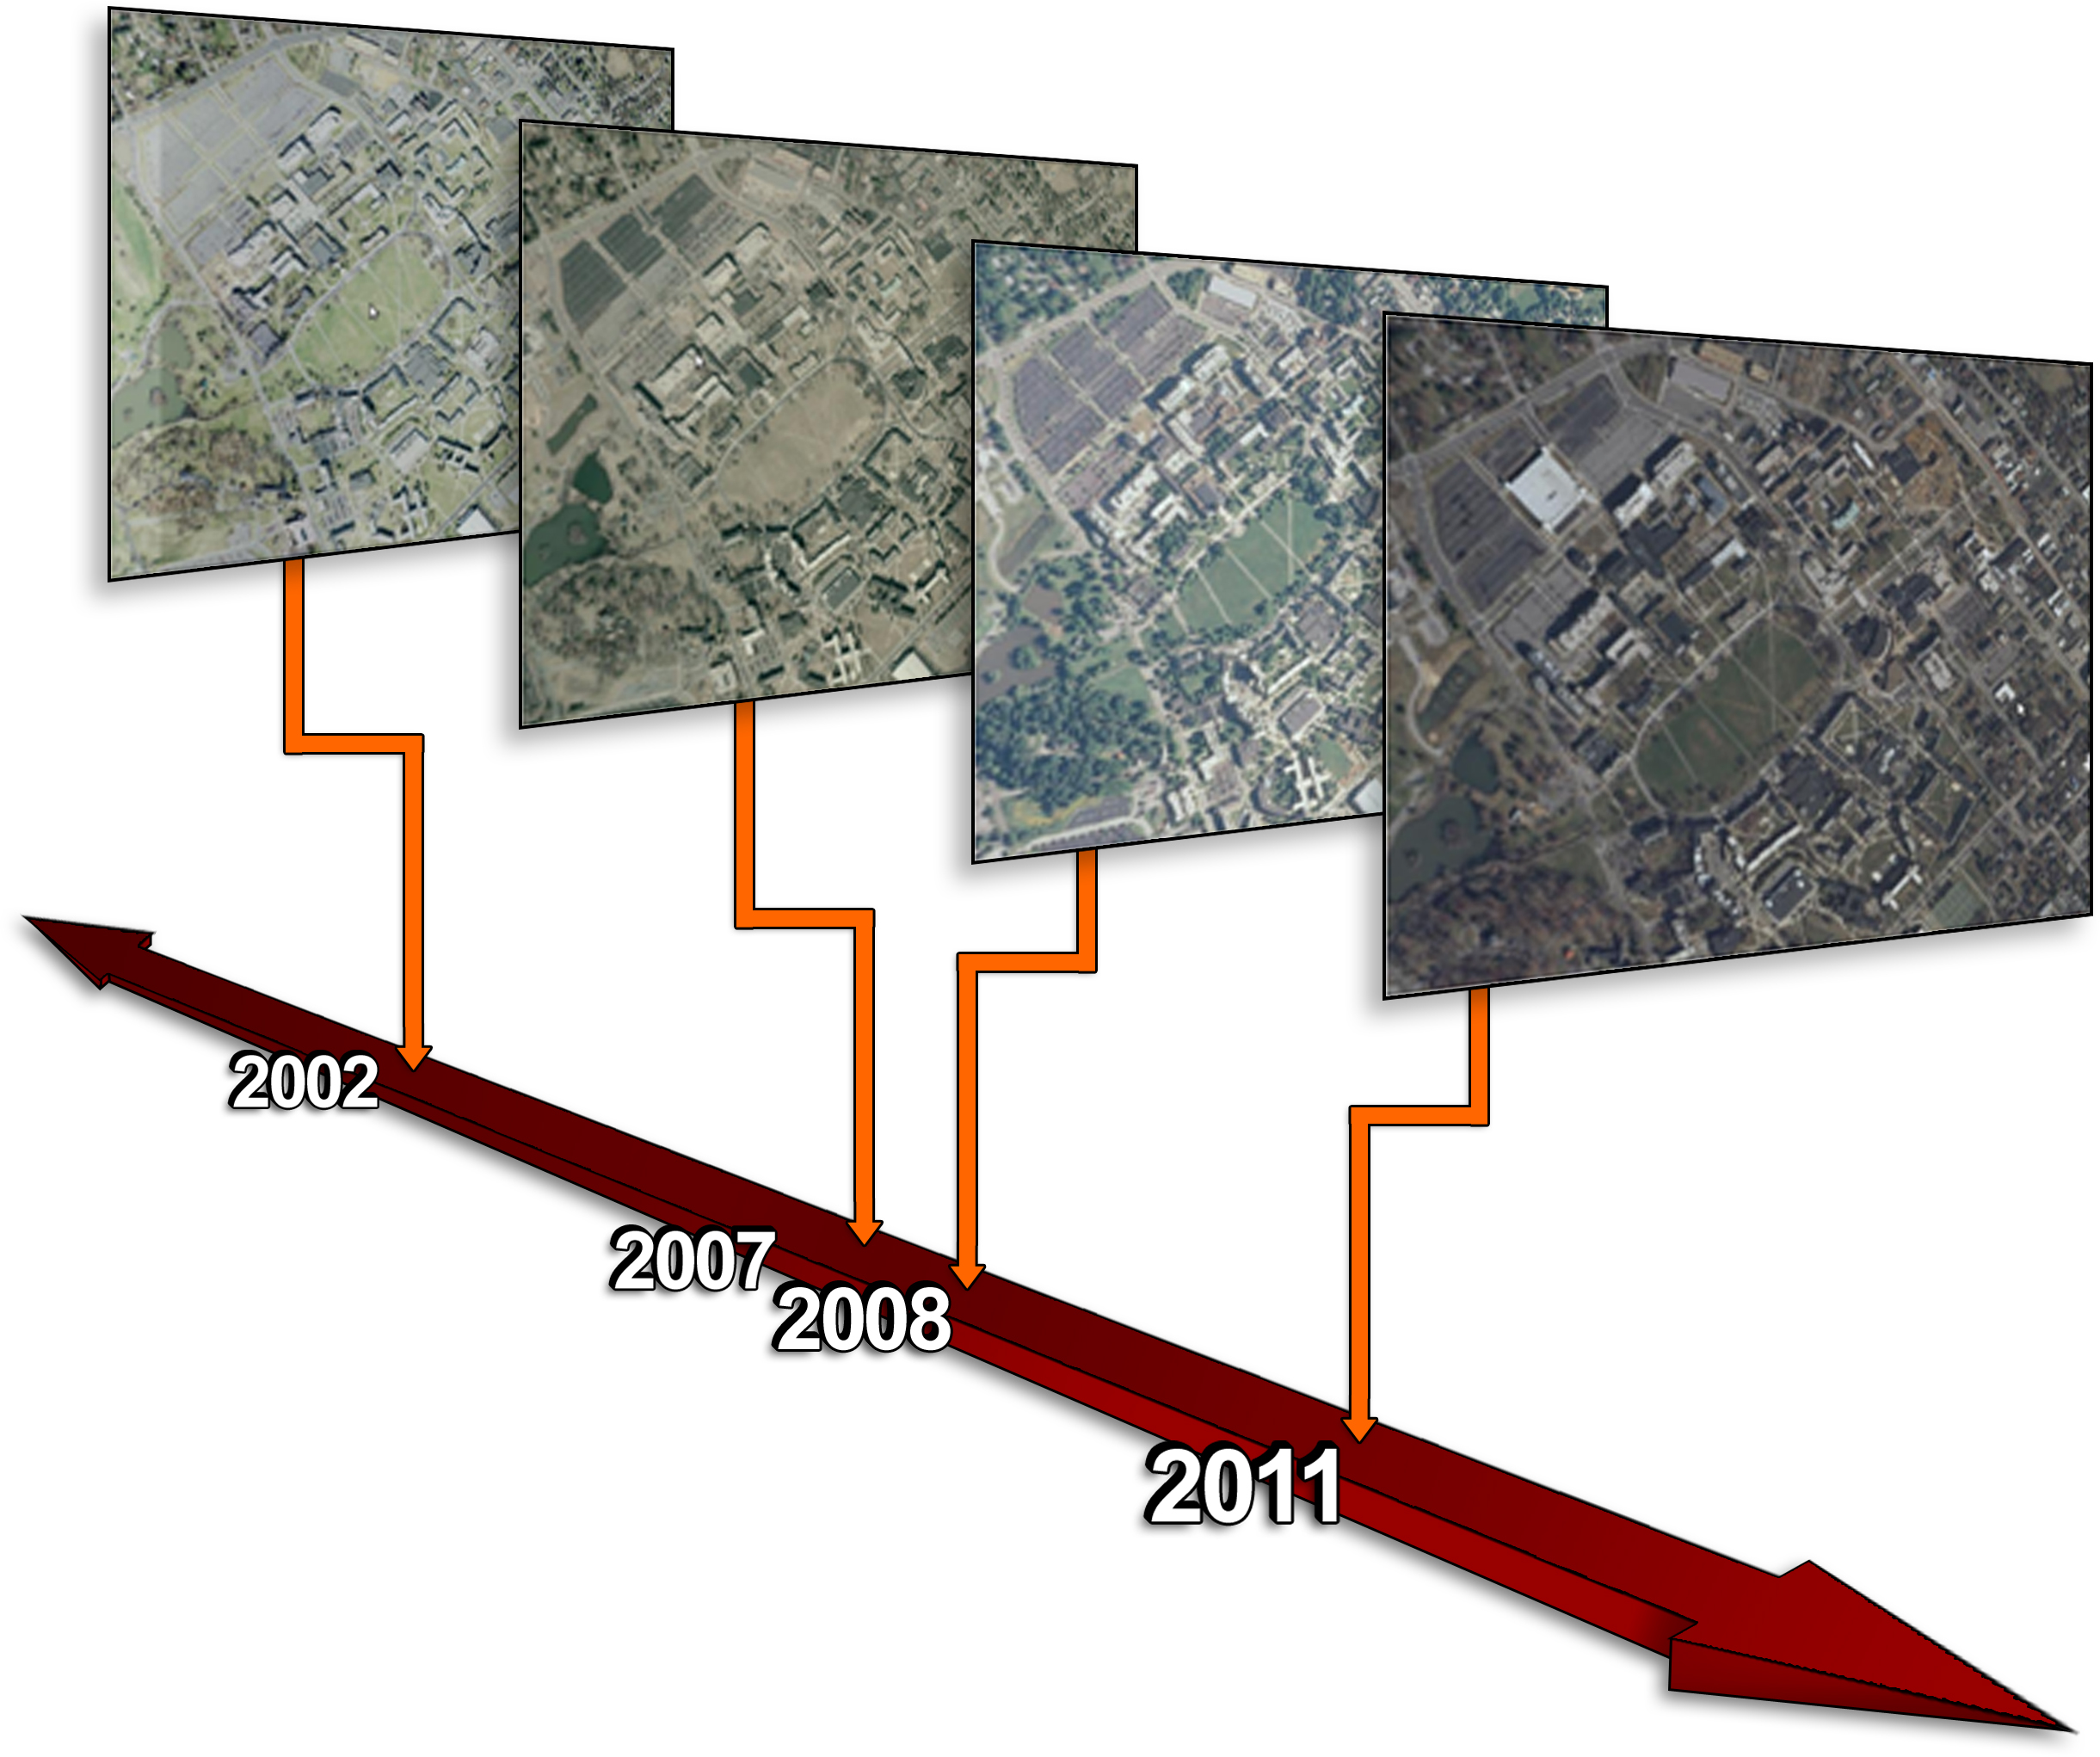 timeline showing the same aerial section of the Virginia Tech campus, photographed in 2002, 2007, 2008, and 2011